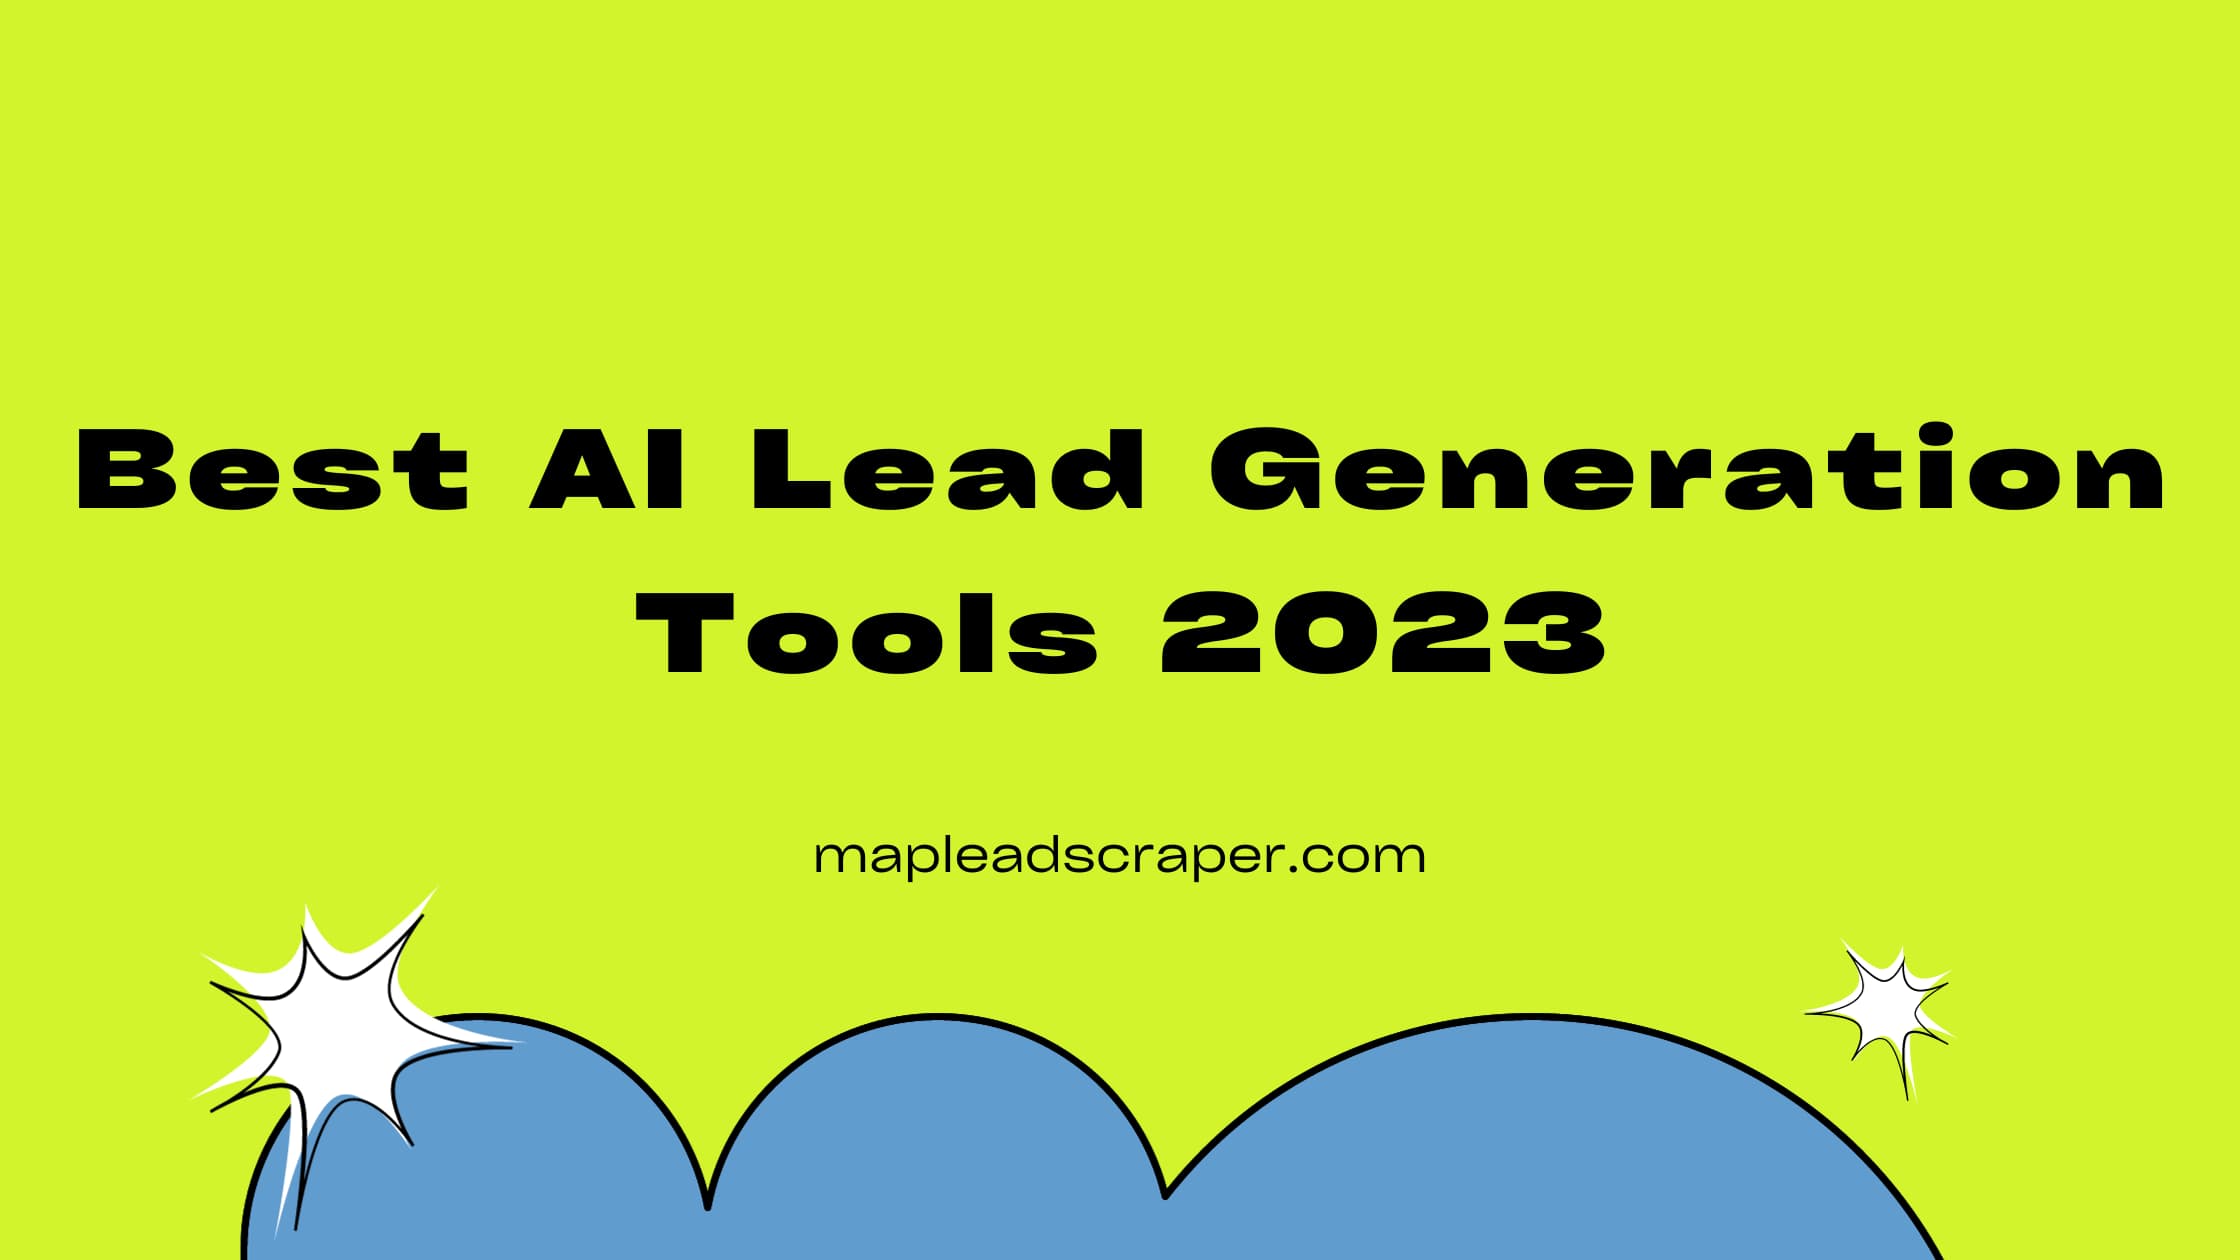 Free Best AI Lead Generation Software Tools 2023